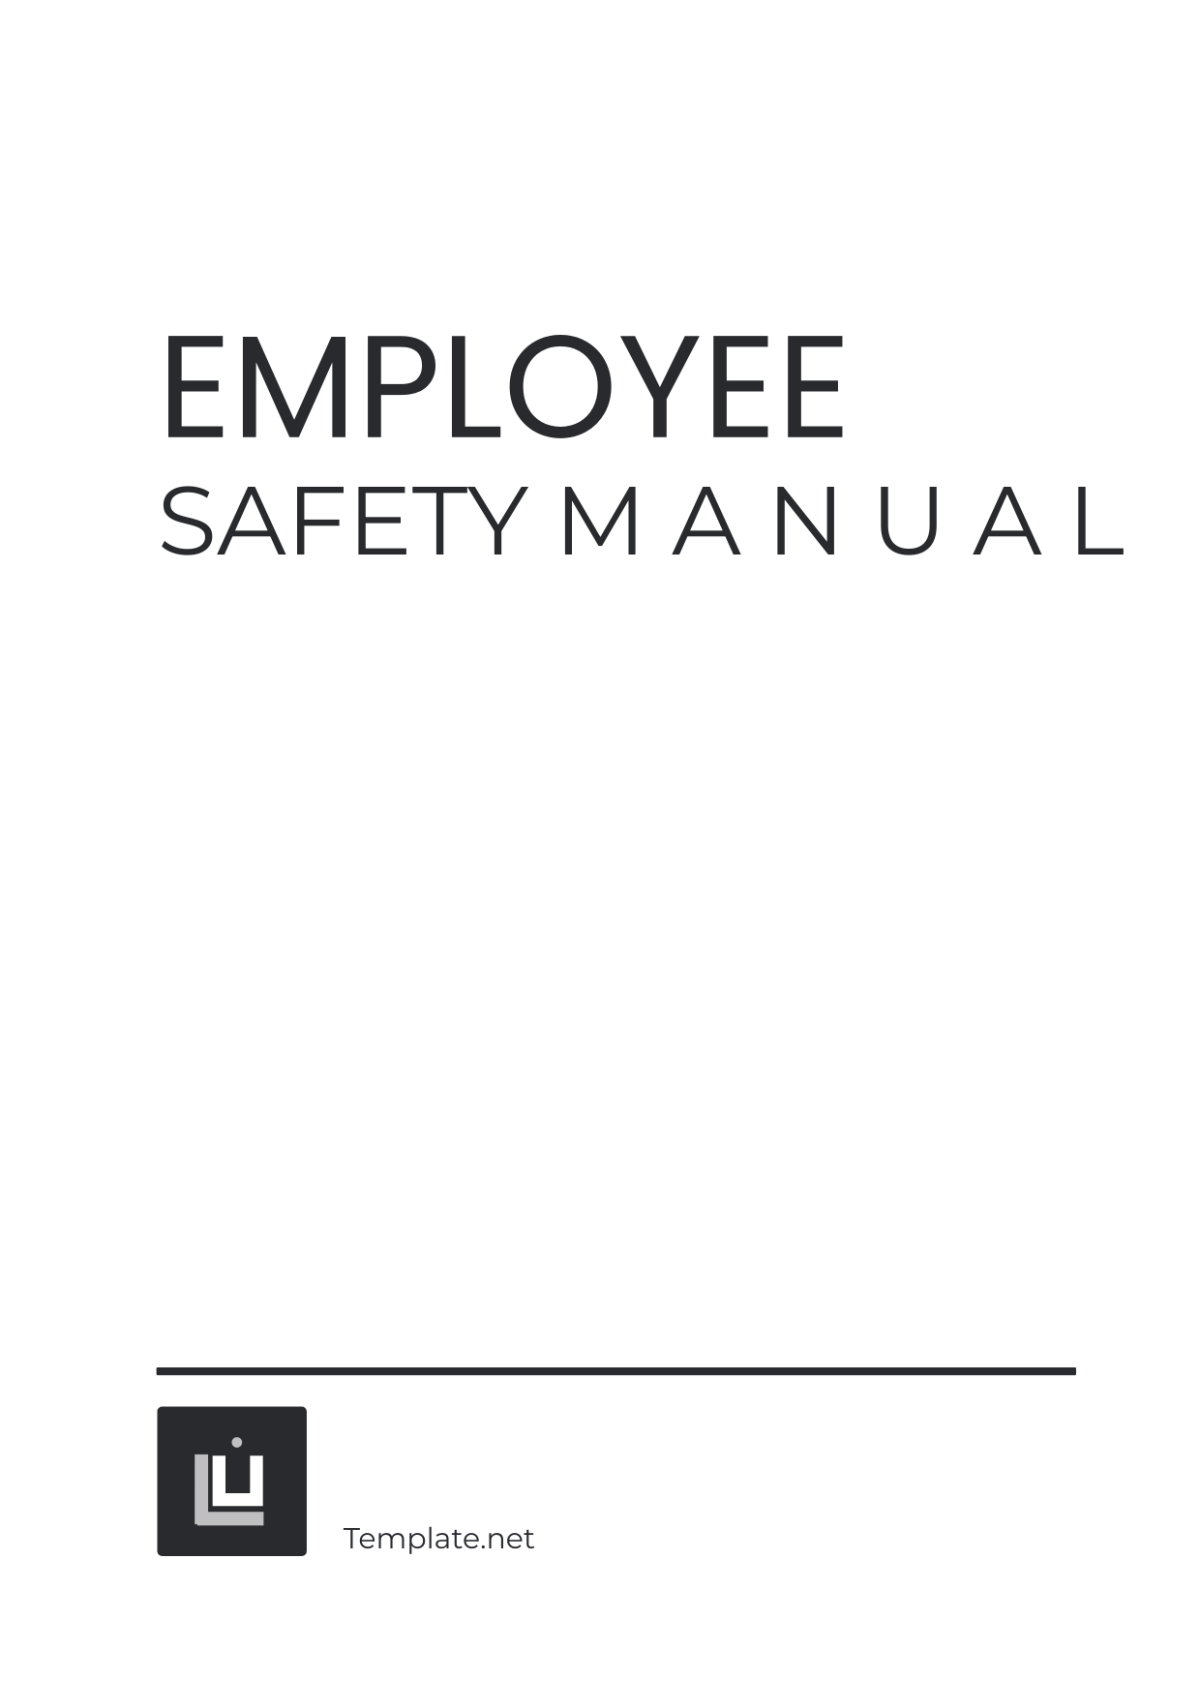 Free Employee Safety Manual Template